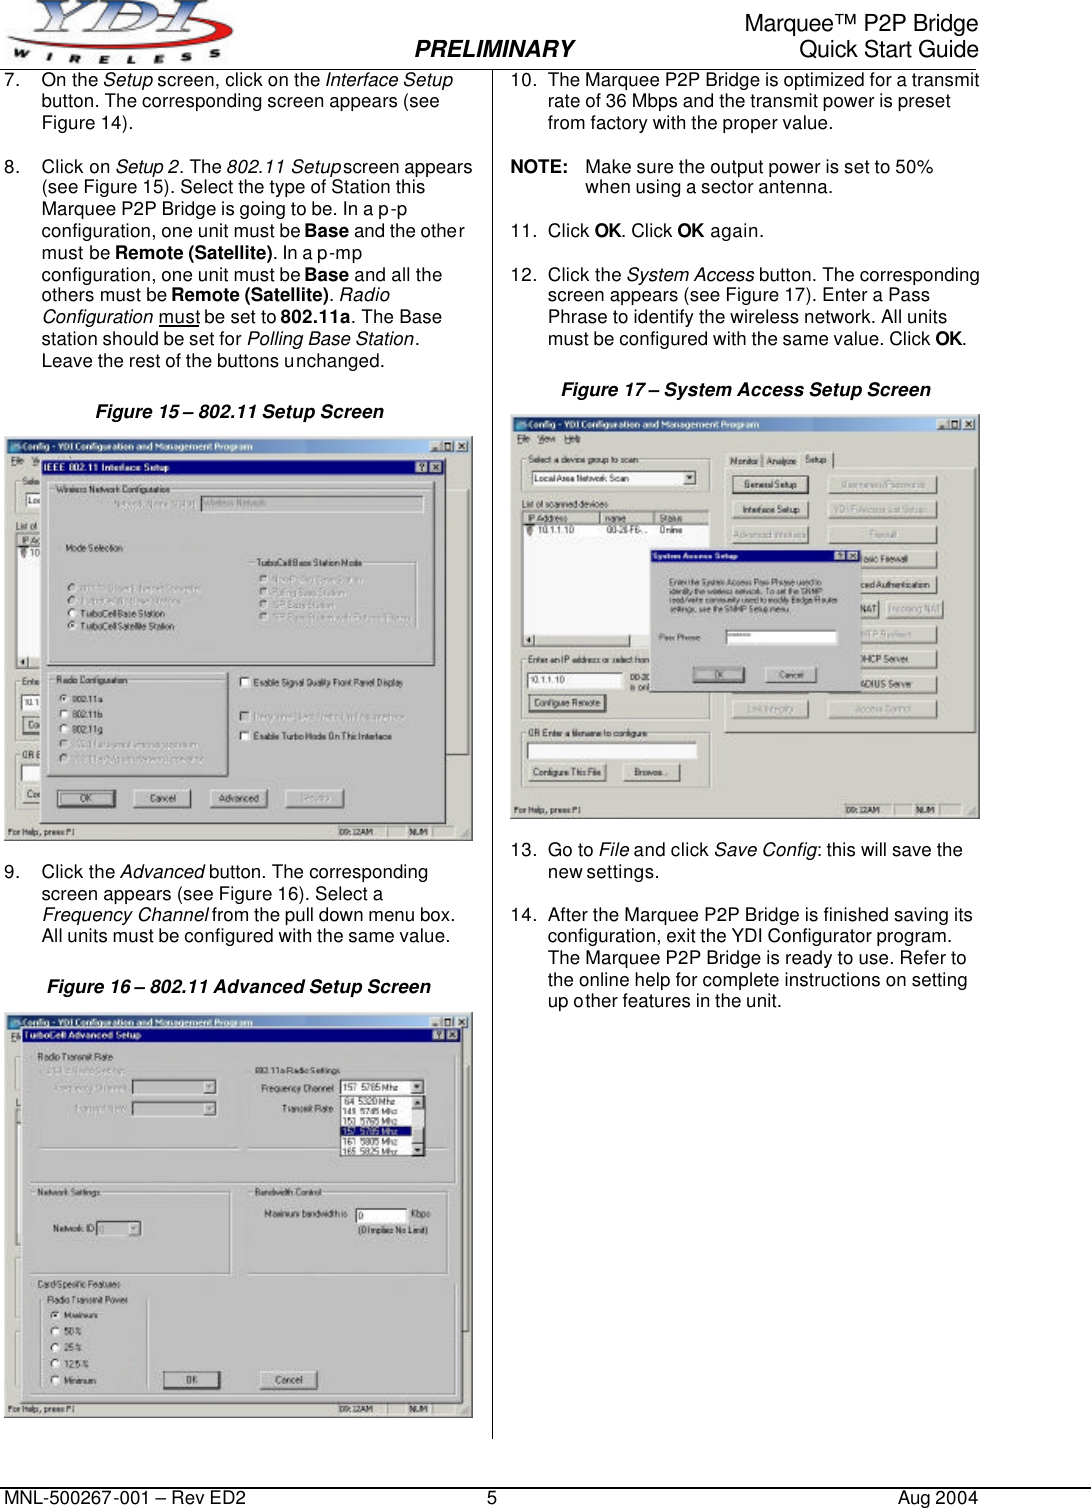                                                                                                                     Marquee™ P2P Bridge  PRELIMINARY Quick Start Guide MNL-500267-001 – Rev ED2 5 Aug 2004 7. On the Setup screen, click on the Interface Setup button. The corresponding screen appears (see Figure 14).  8. Click on Setup 2. The 802.11 Setup screen appears (see Figure 15). Select the type of Station this Marquee P2P Bridge is going to be. In a p-p configuration, one unit must be Base and the other must be Remote (Satellite). In a p-mp configuration, one unit must be Base and all the others must be Remote (Satellite). Radio Configuration must be set to 802.11a. The Base station should be set for Polling Base Station. Leave the rest of the buttons unchanged. Figure 15 – 802.11 Setup Screen   9. Click the Advanced button. The corresponding screen appears (see Figure 16). Select a Frequency Channel from the pull down menu box. All units must be configured with the same value. Figure 16 – 802.11 Advanced Setup Screen   10. The Marquee P2P Bridge is optimized for a transmit rate of 36 Mbps and the transmit power is preset from factory with the proper value.  NOTE: Make sure the output power is set to 50% when using a sector antenna.  11. Click OK. Click OK again.  12. Click the System Access button. The corresponding screen appears (see Figure 17). Enter a Pass Phrase to identify the wireless network. All units must be configured with the same value. Click OK. Figure 17 – System Access Setup Screen   13. Go to File and click Save Config: this will save the new settings.  14. After the Marquee P2P Bridge is finished saving its configuration, exit the YDI Configurator program. The Marquee P2P Bridge is ready to use. Refer to the online help for complete instructions on setting up other features in the unit. 